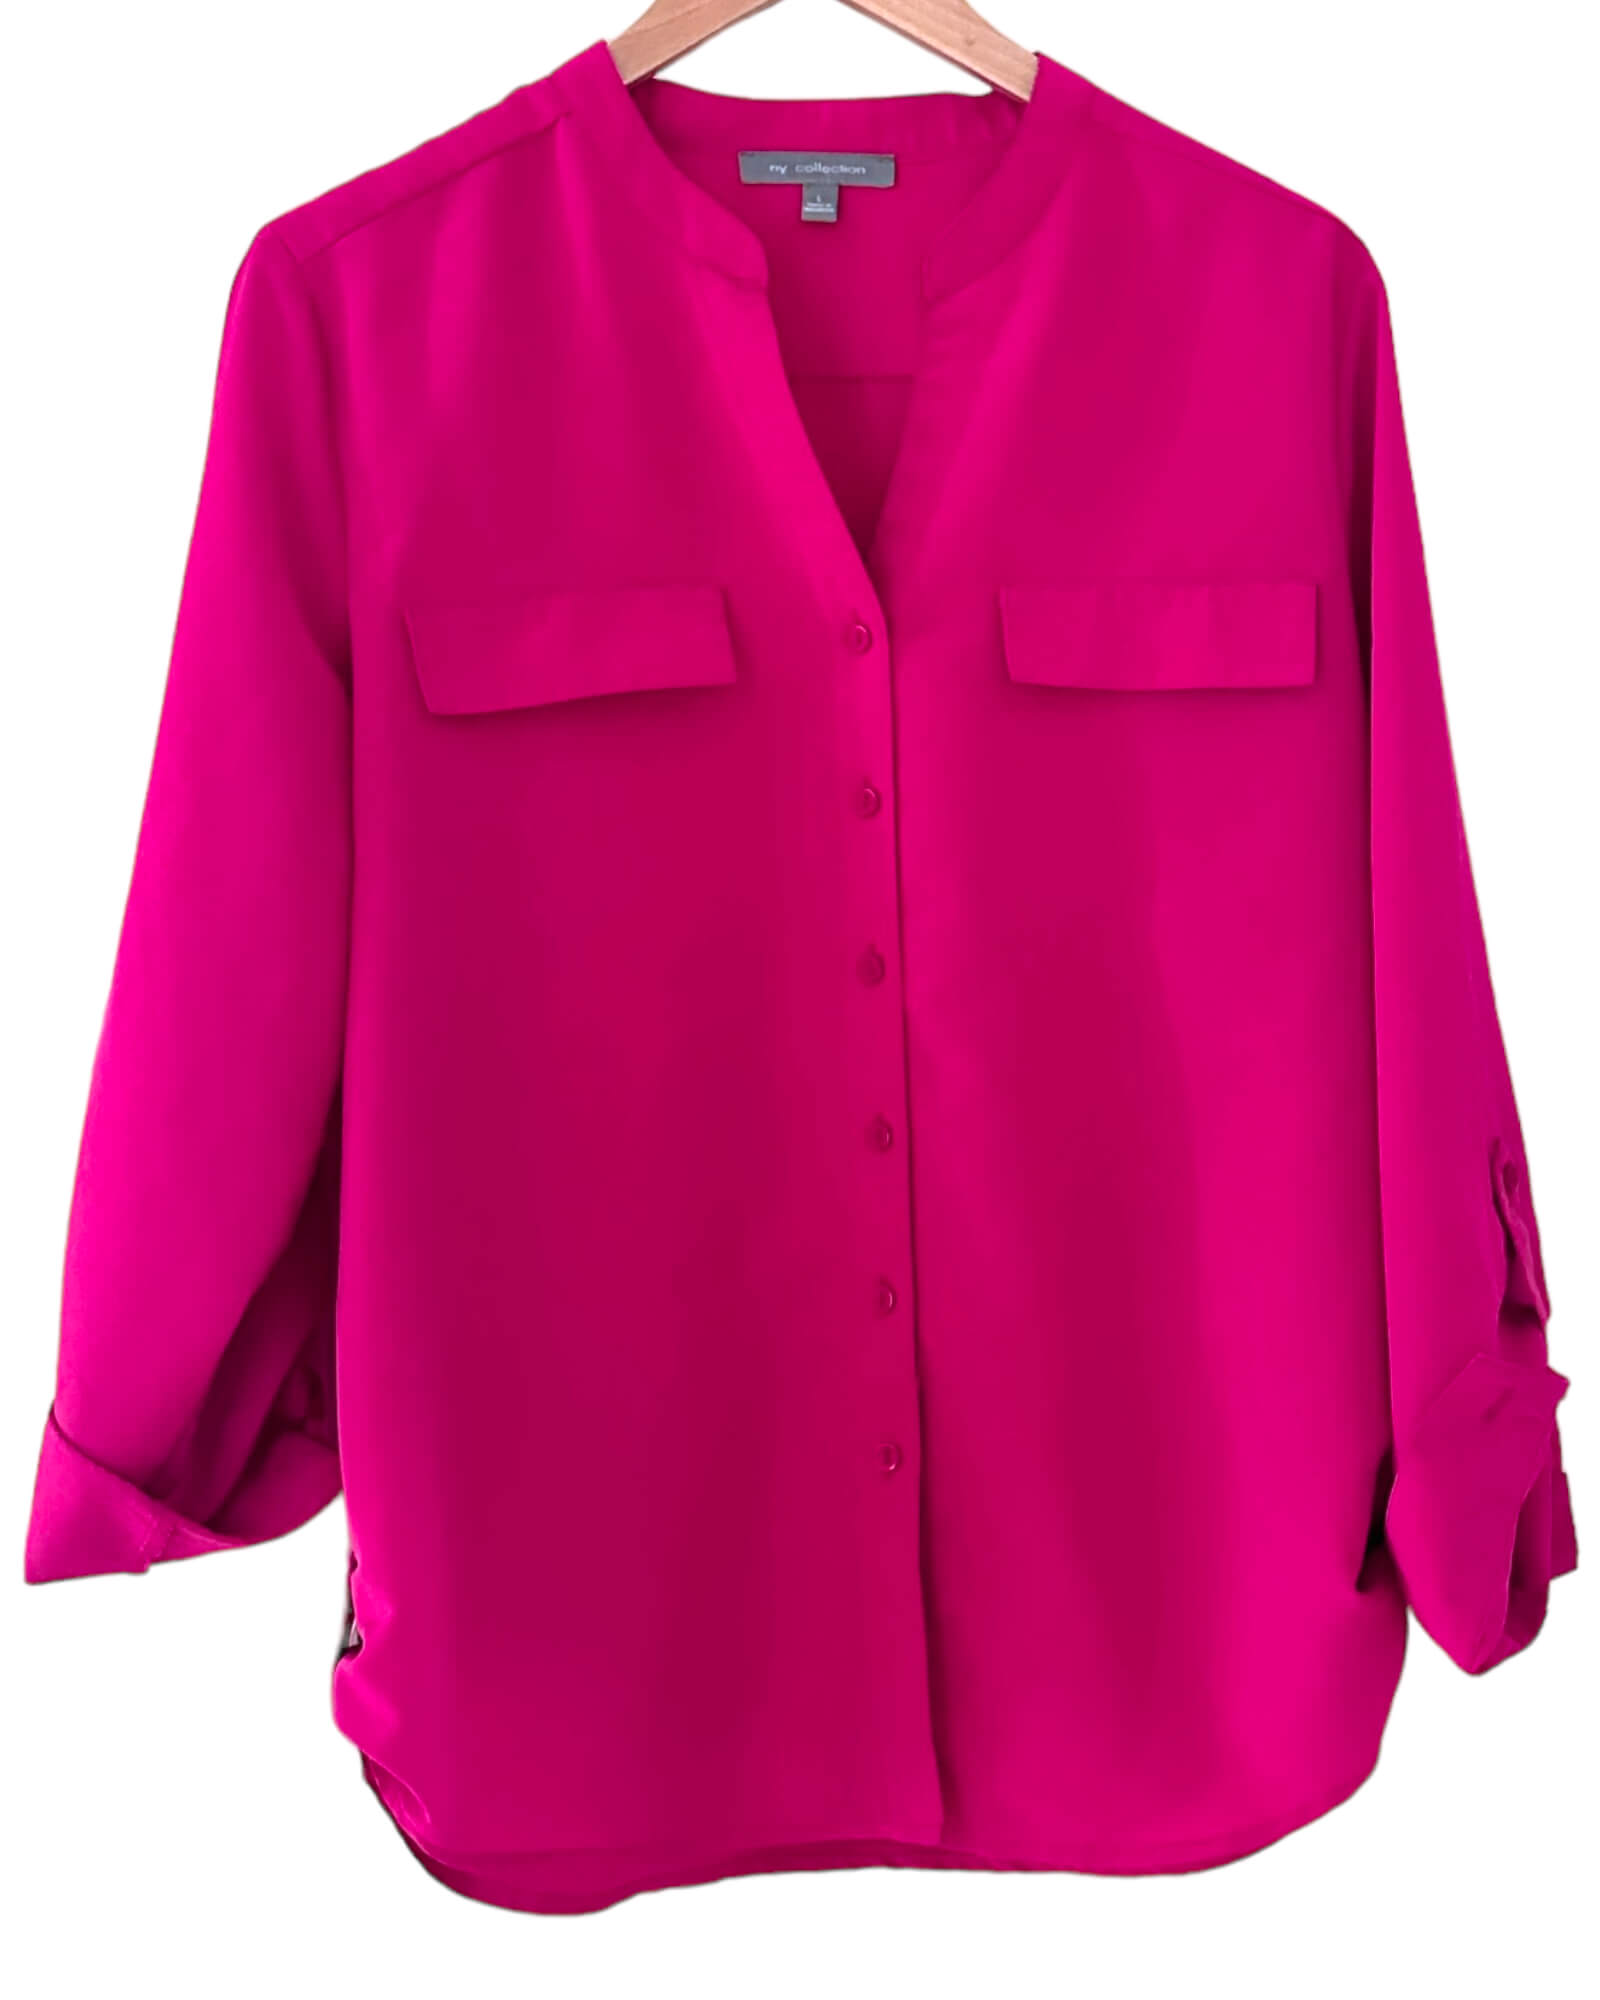 Light Summer NY COLLECTION button-down begonia pink blouse